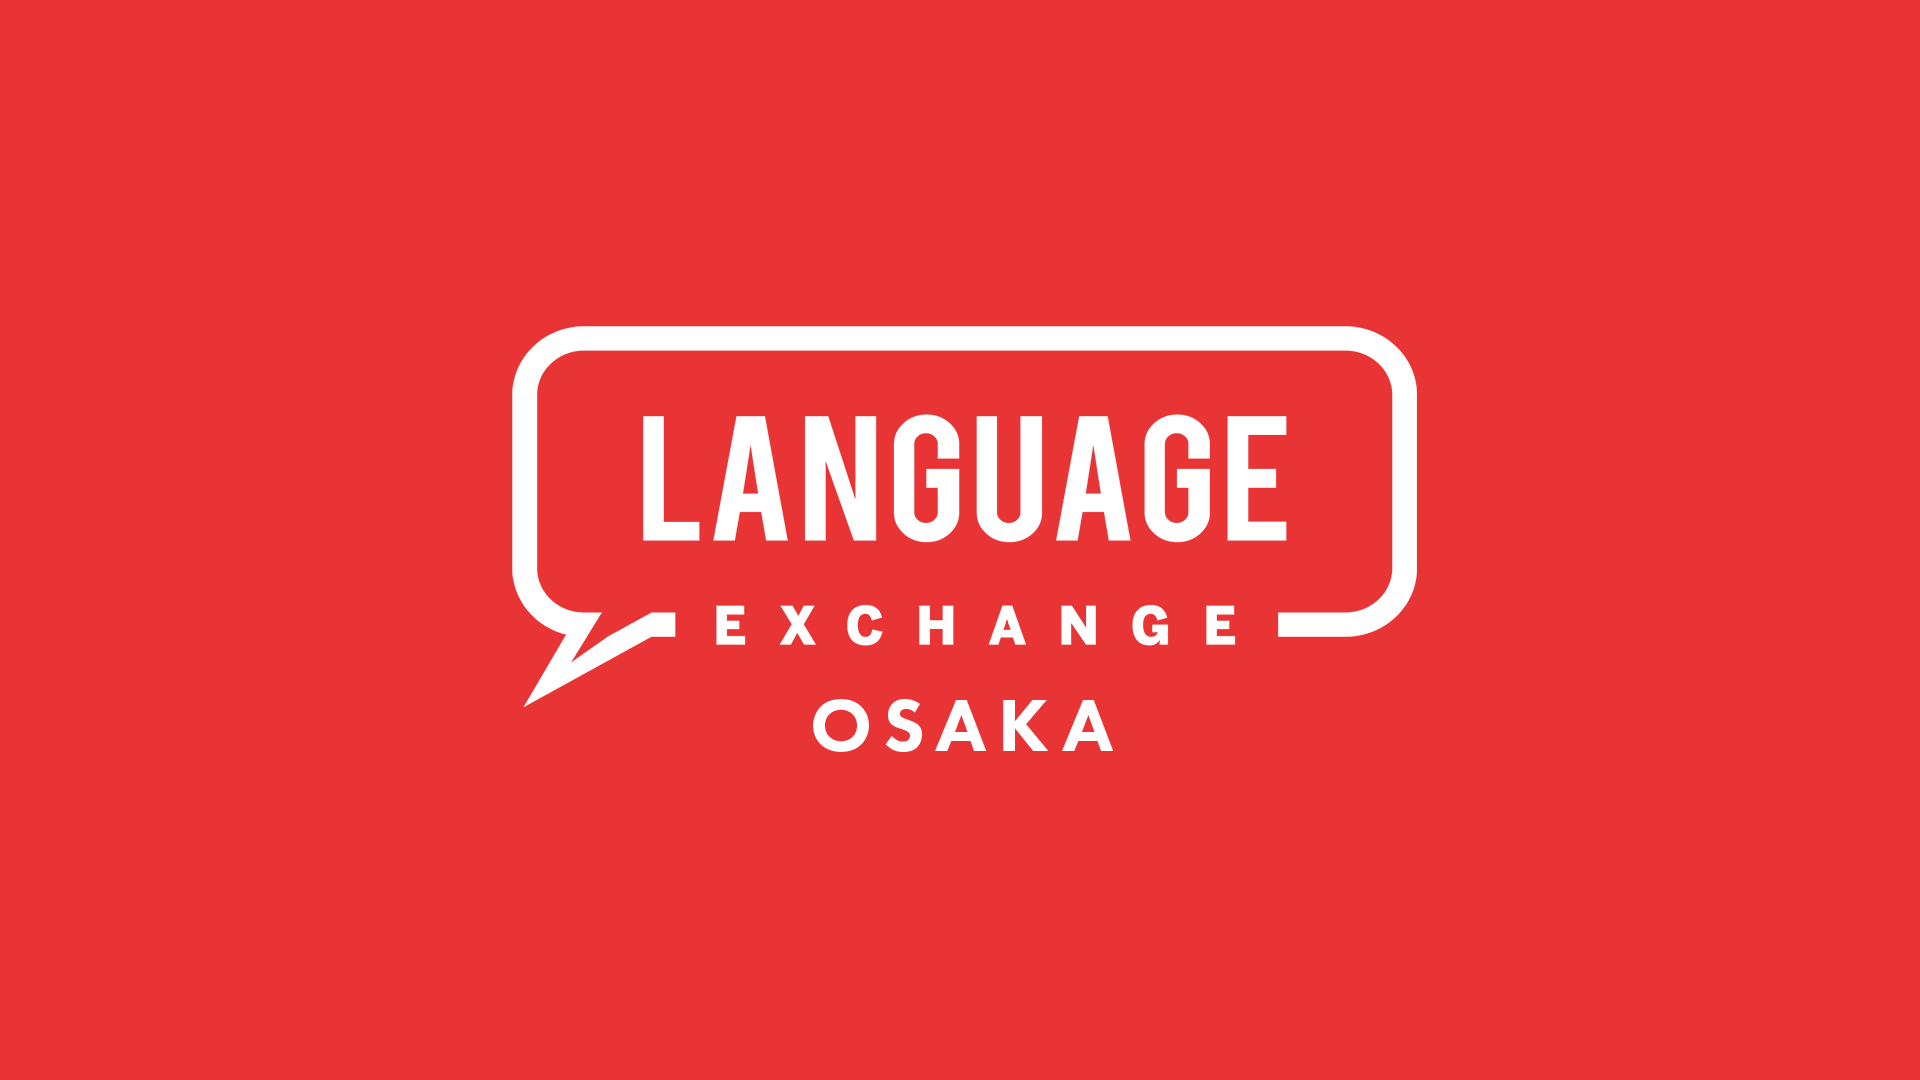 Featured image for “【Every Sunday】Language Exchange”